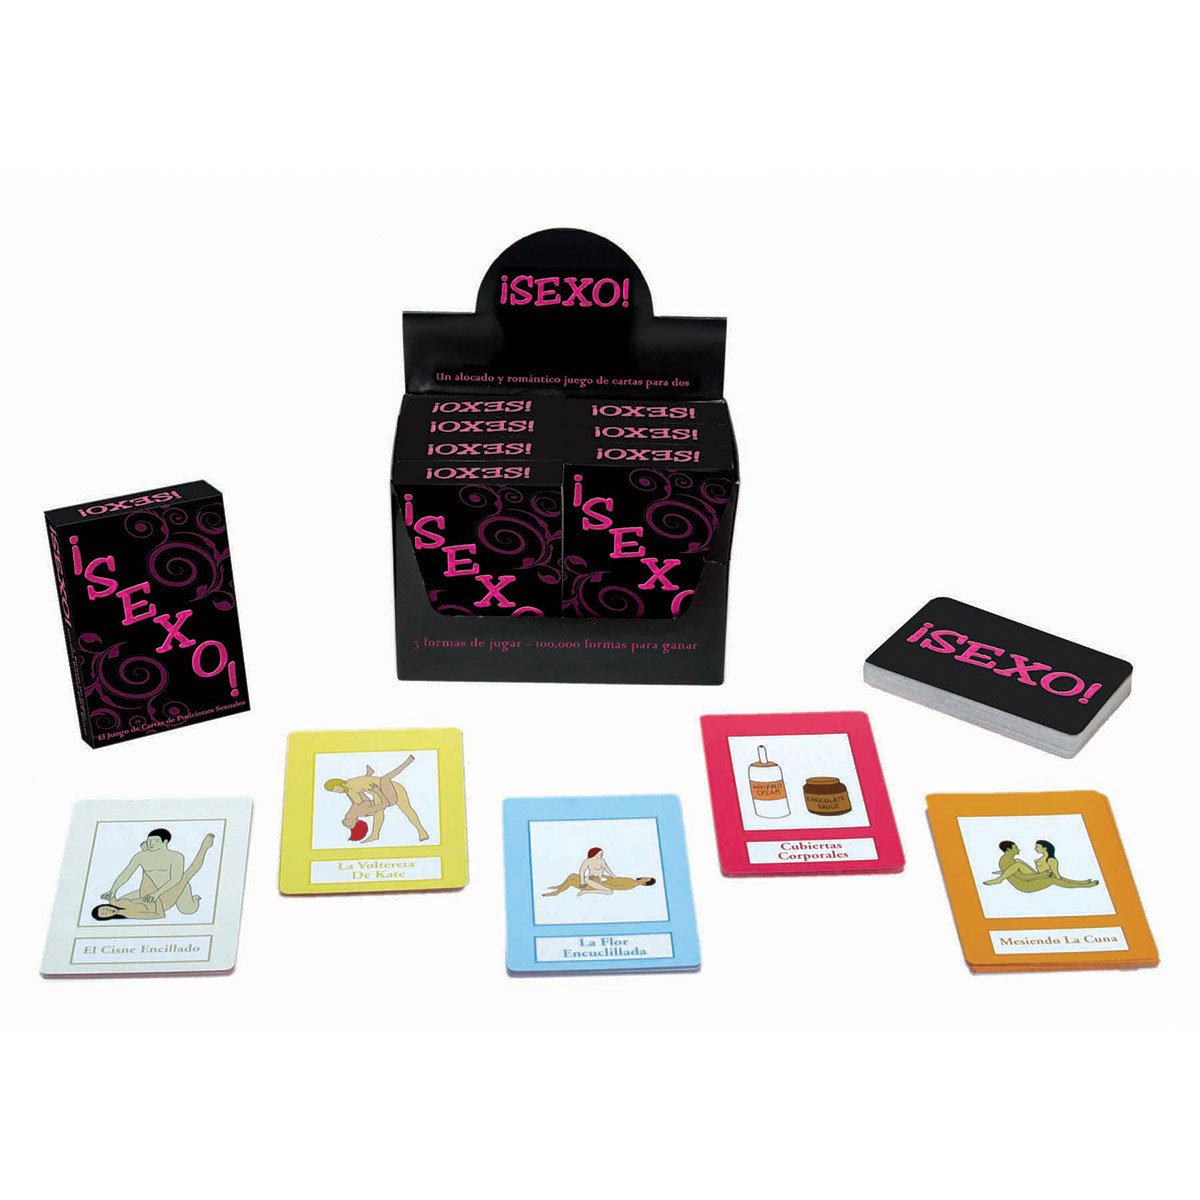 Sexo! Card Game - Buy At Luxury Toy X - Free 3-Day Shipping